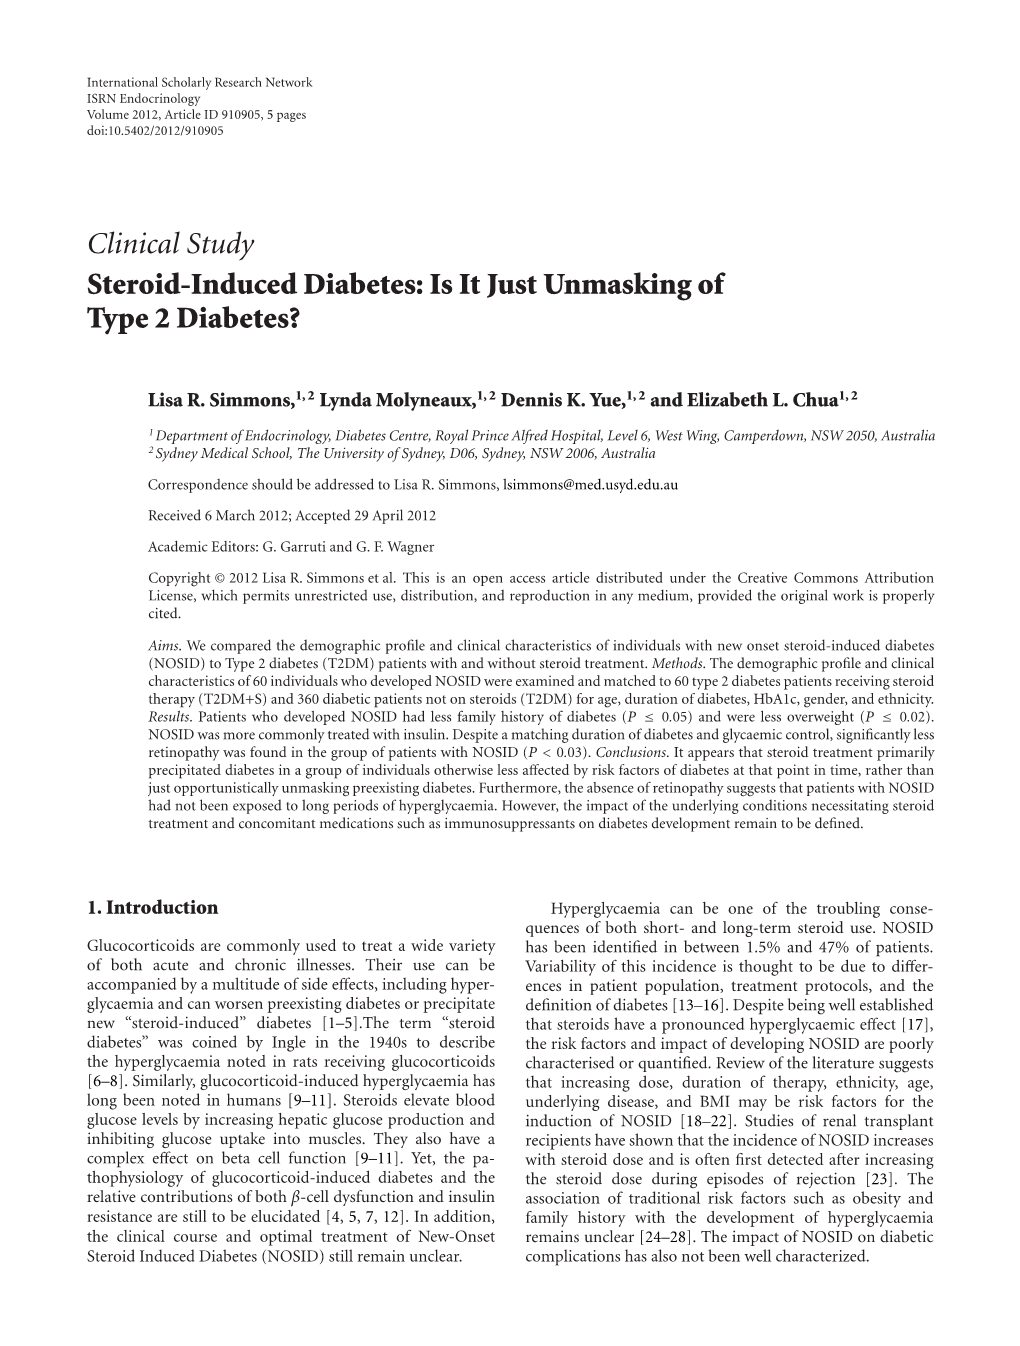 Steroid-Induced Diabetes: Is It Just Unmasking of Type 2 Diabetes?